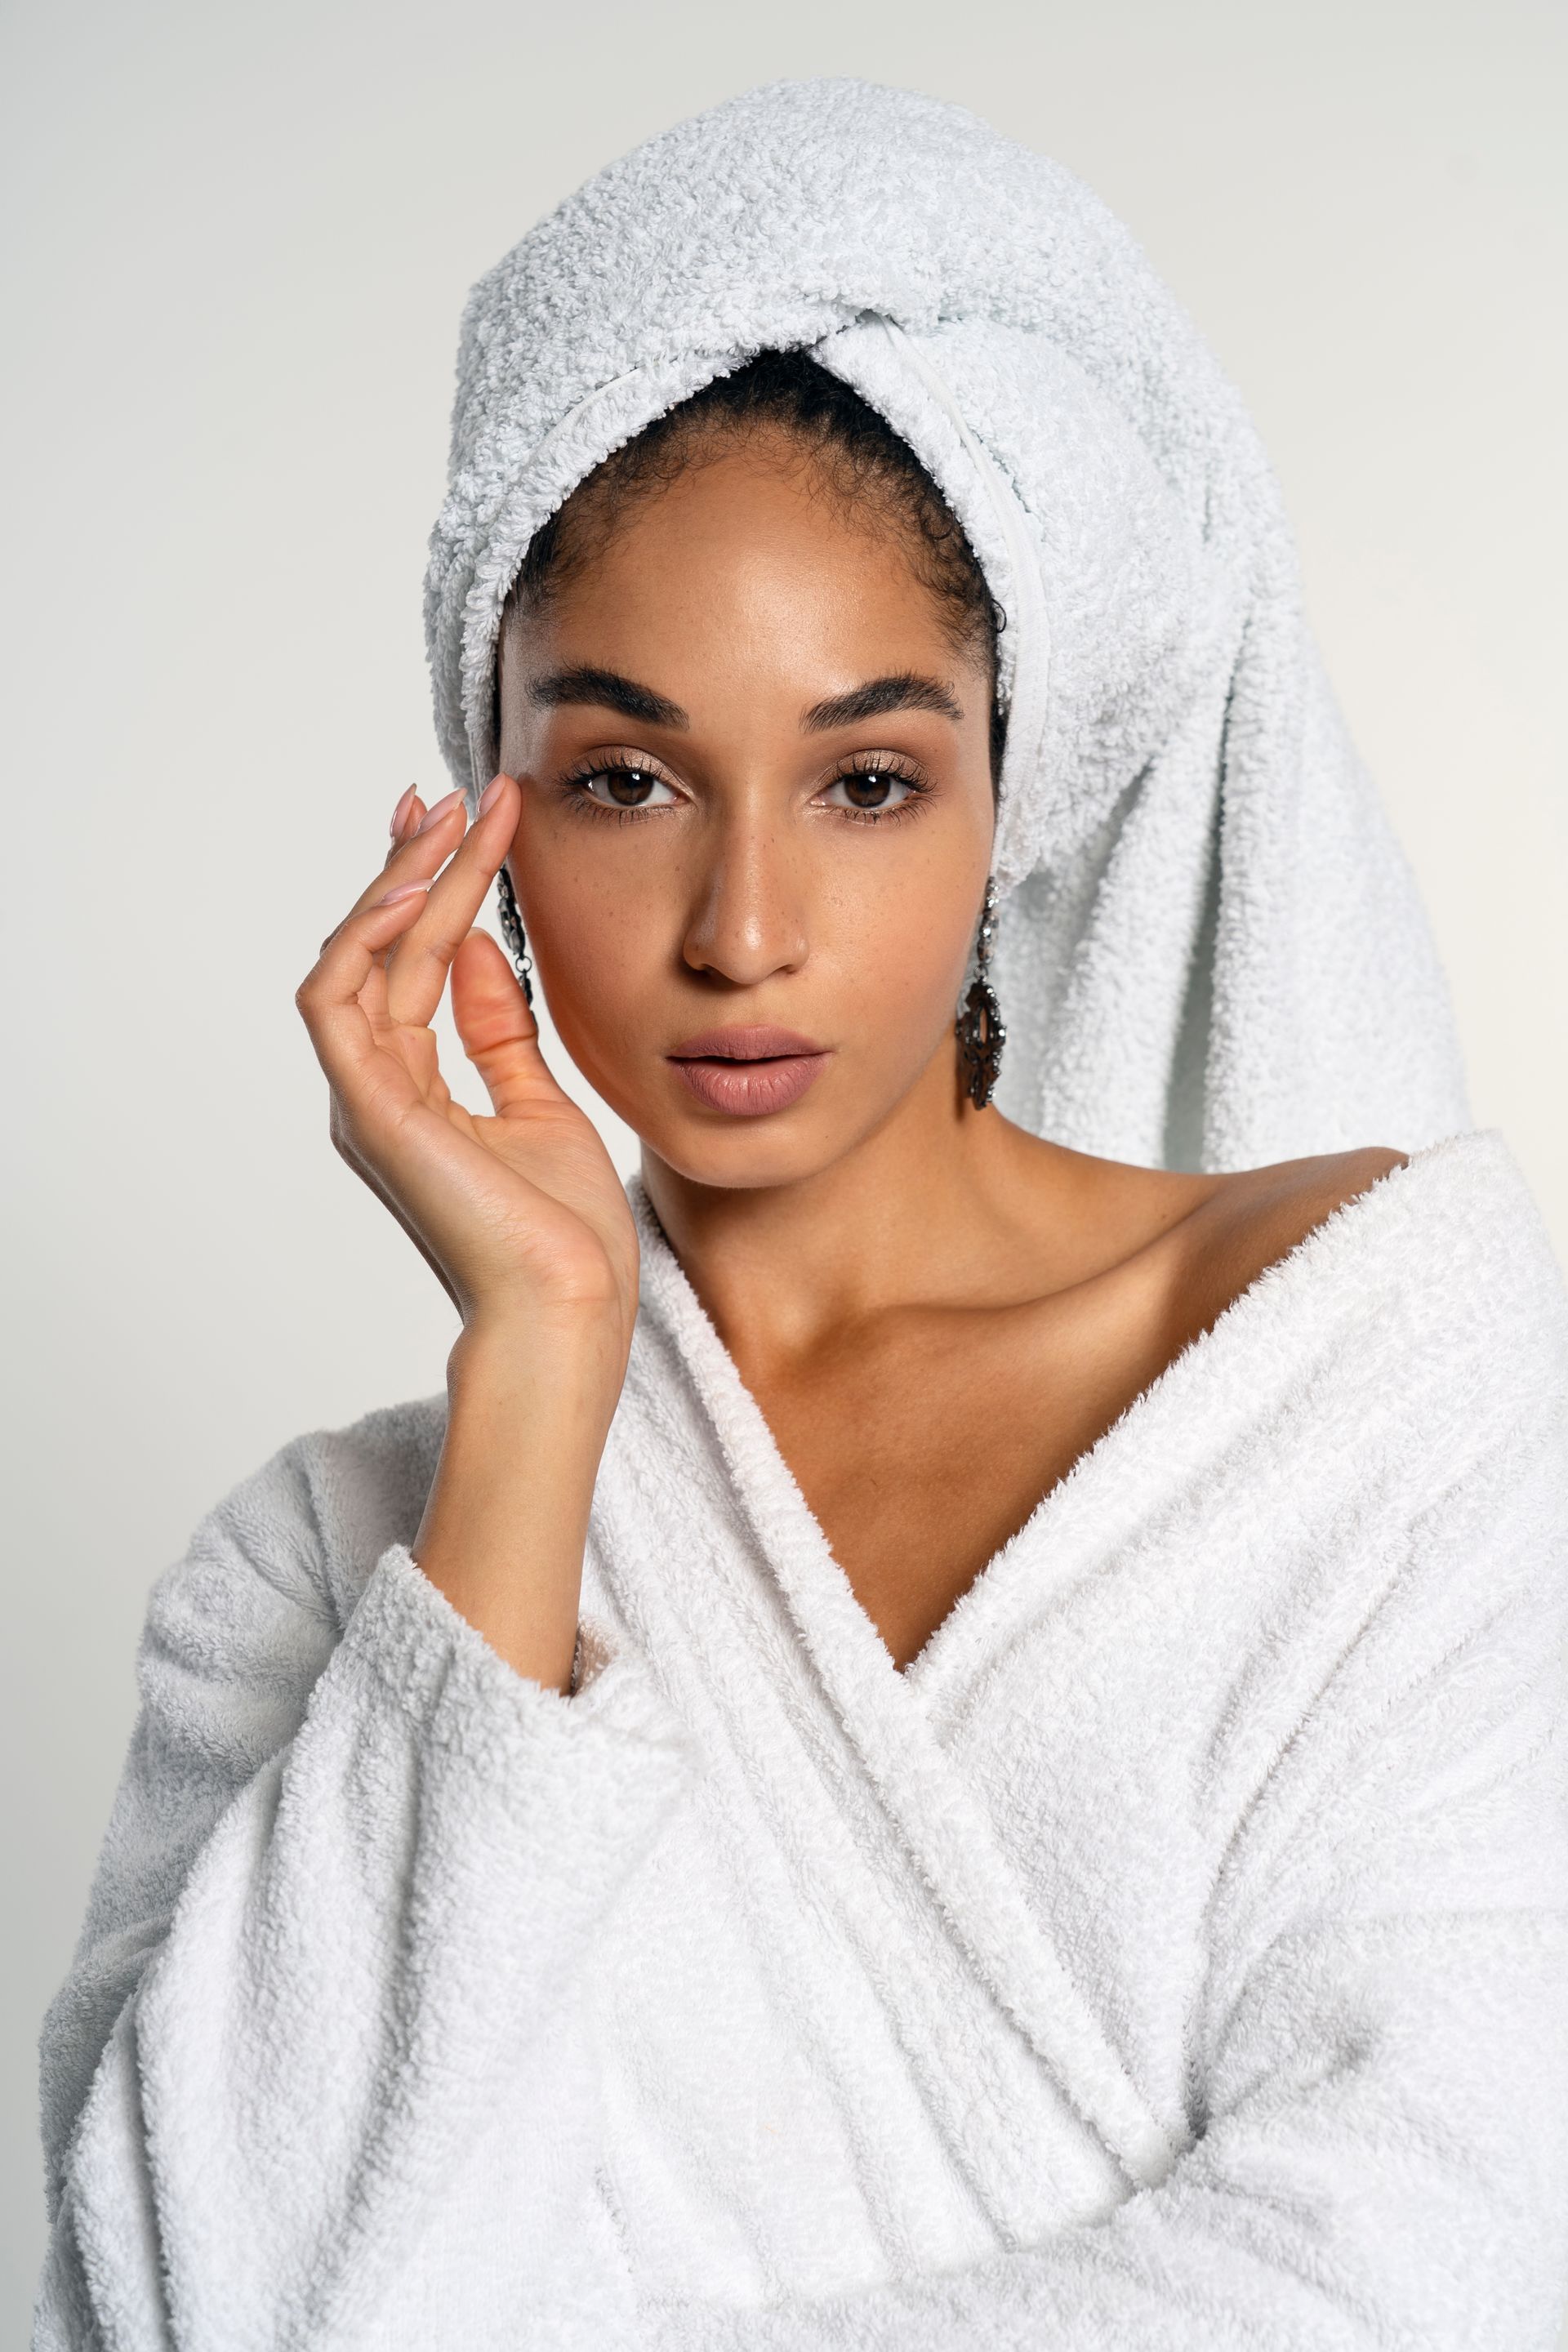 a woman in a white robe with a towel wrapped around her head .